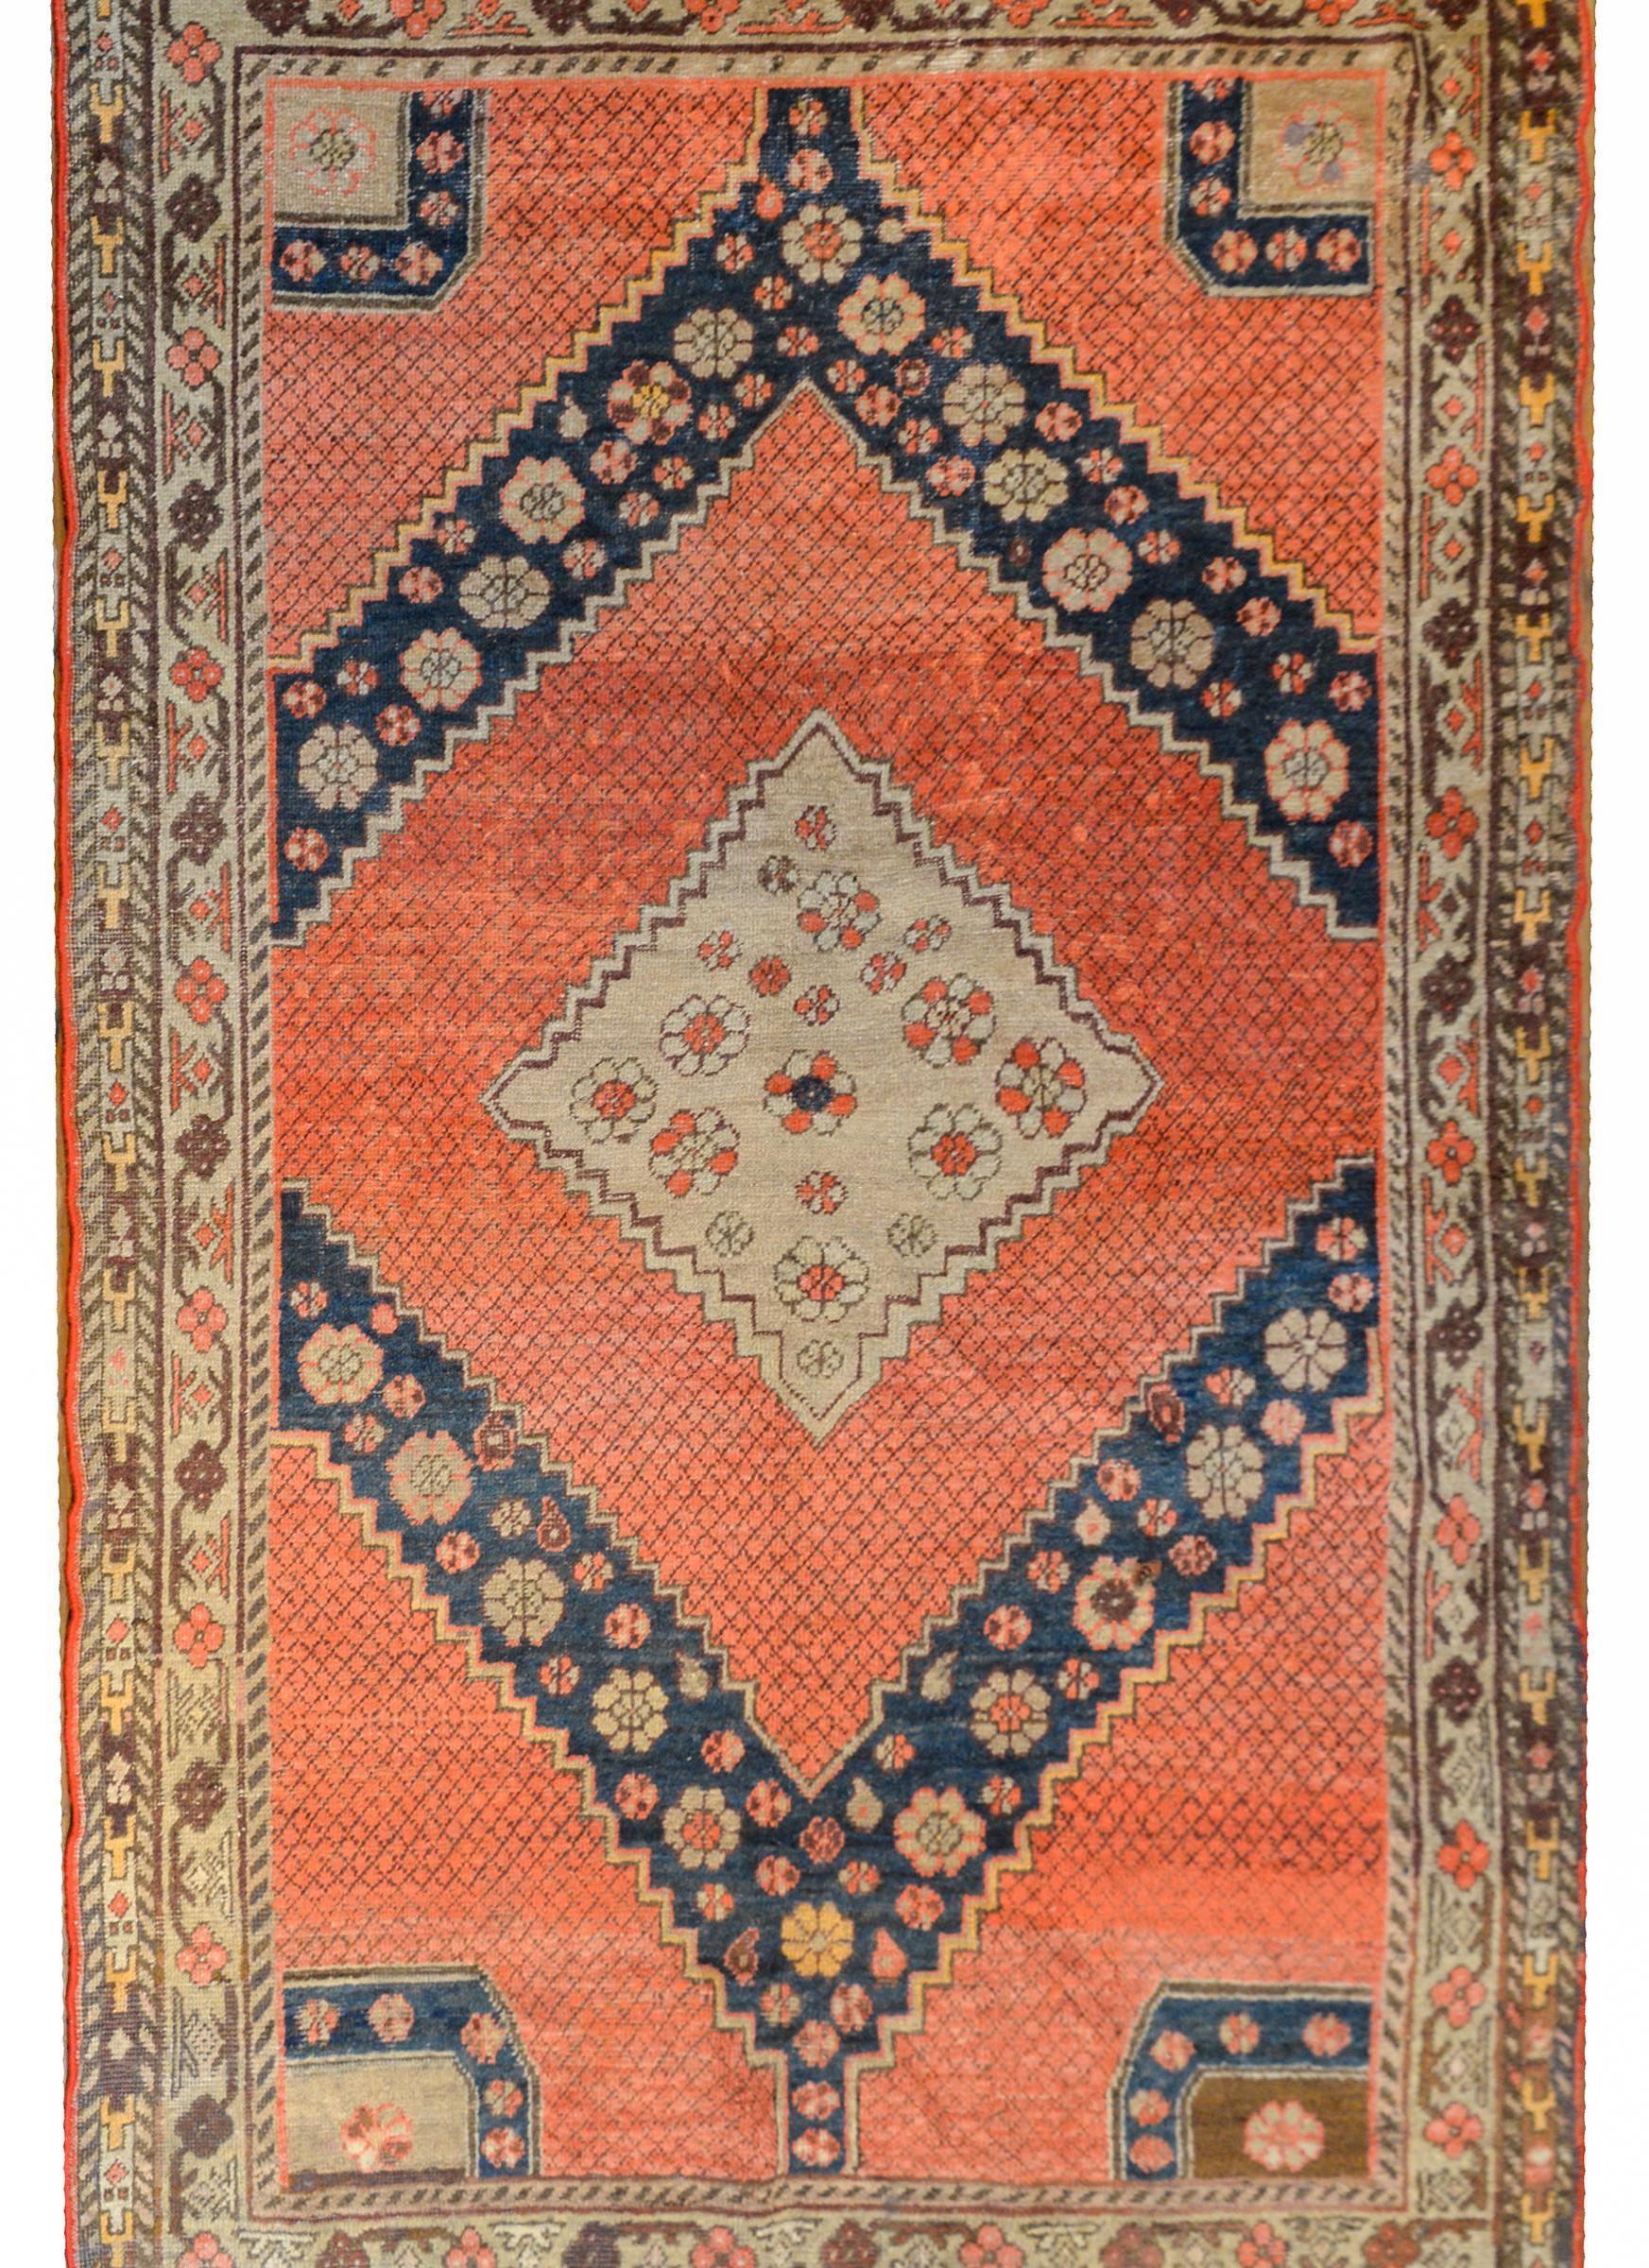 A mesmerizing early 20th century Central Asian Samarkand rug with a large central diamond medallion with a stylized floral pattern woven in coral and beige wool on a coral field with a simple thin lattice pattern, with more stylized flowers on a